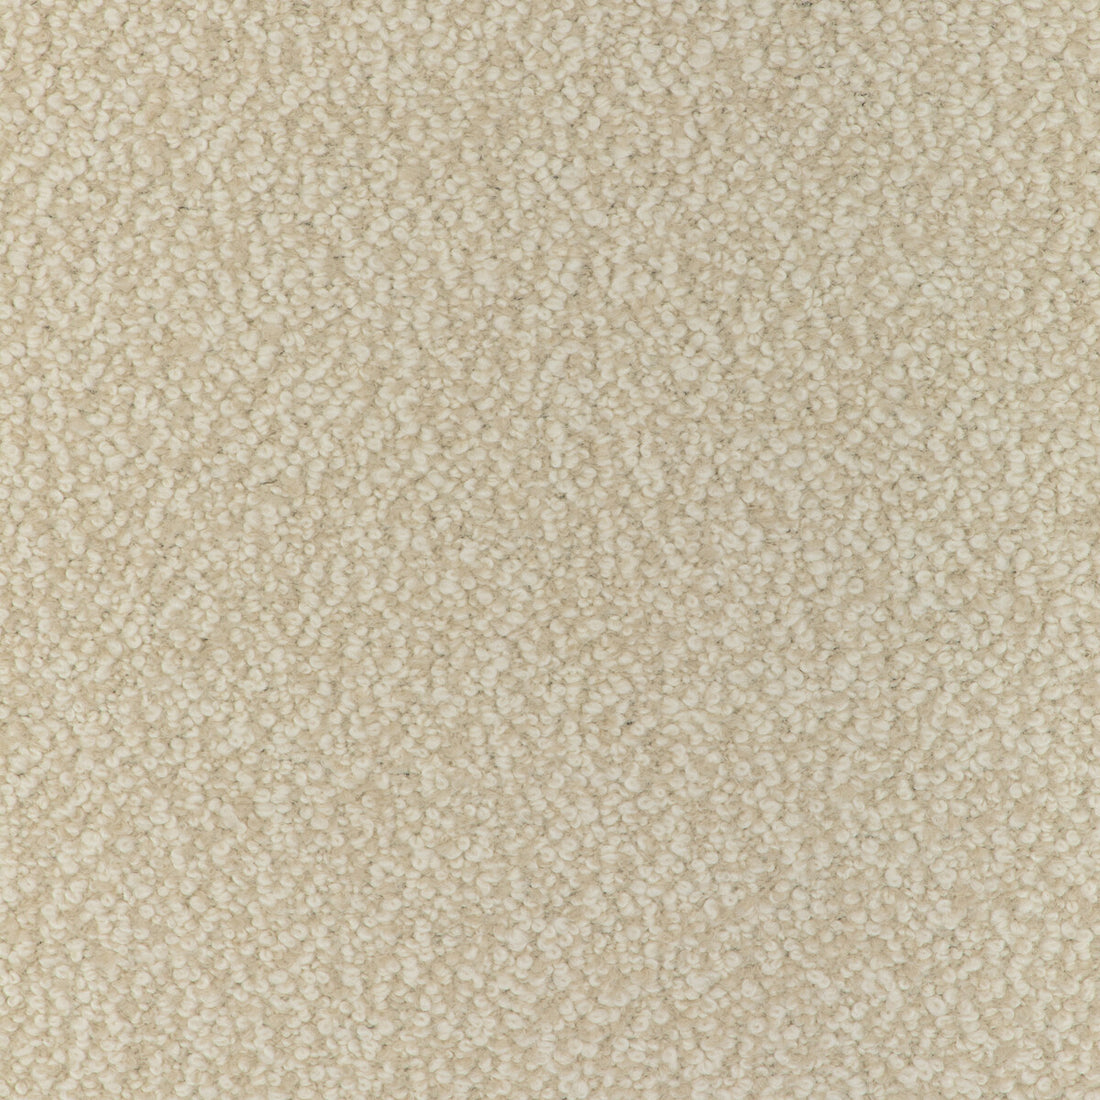 Alpaca Boucle fabric in oyster color - pattern 36898.116.0 - by Kravet Couture in the Atelier Weaves collection